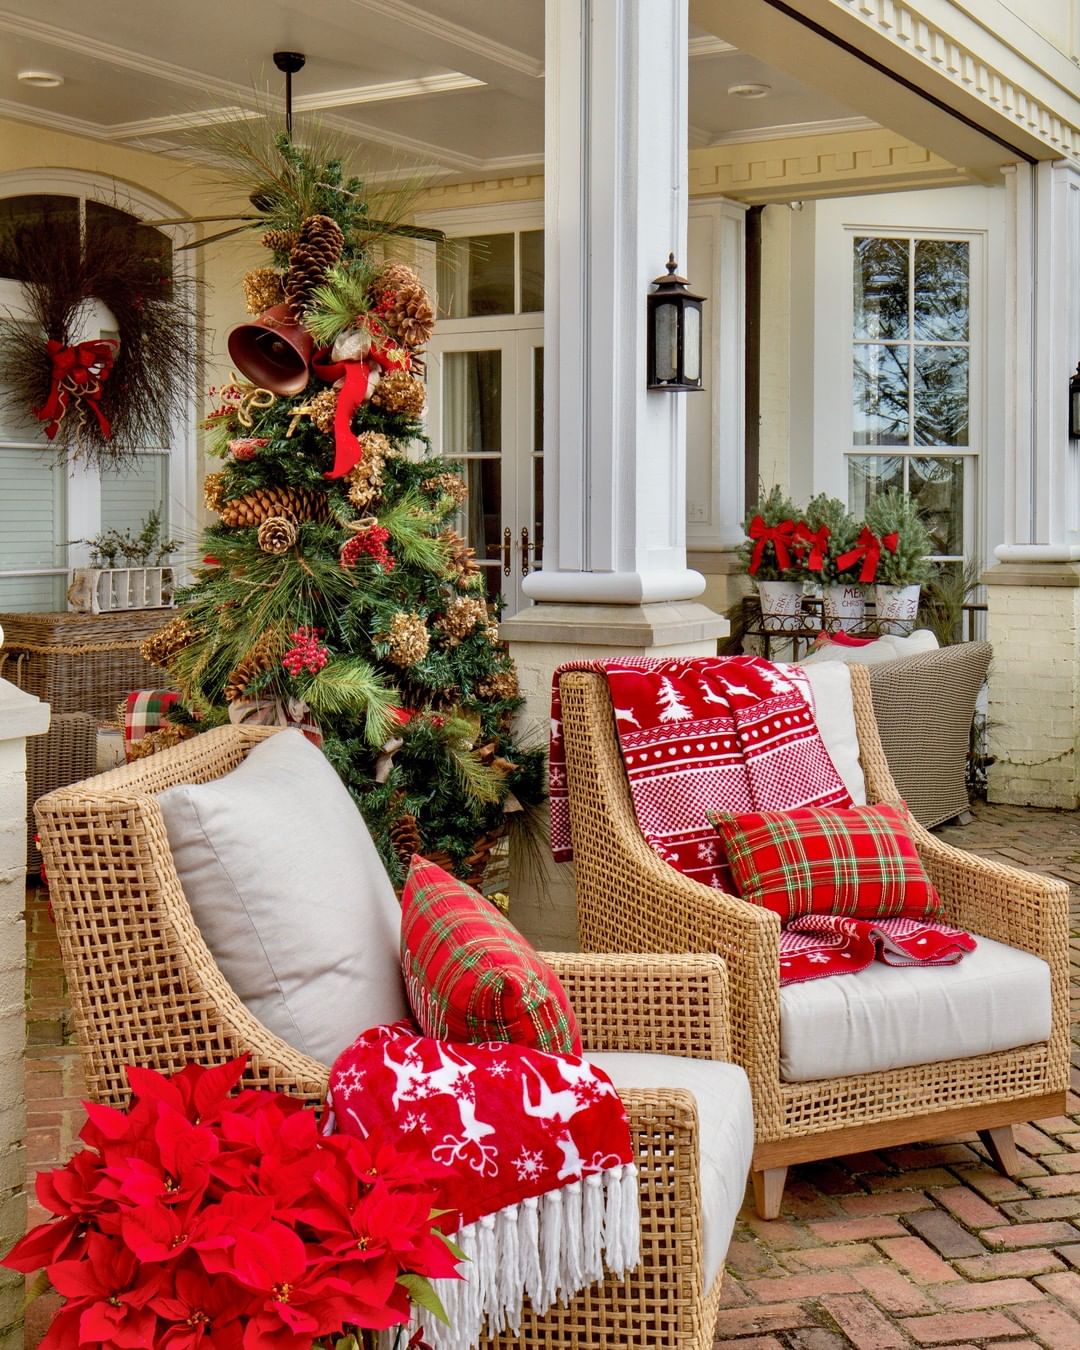 Outdoor furniture chairs have red holiday pillows and a red, white, and green Christmas icon decorated blanket laid over the top of one. Photo by Instagram user @southernladymag.